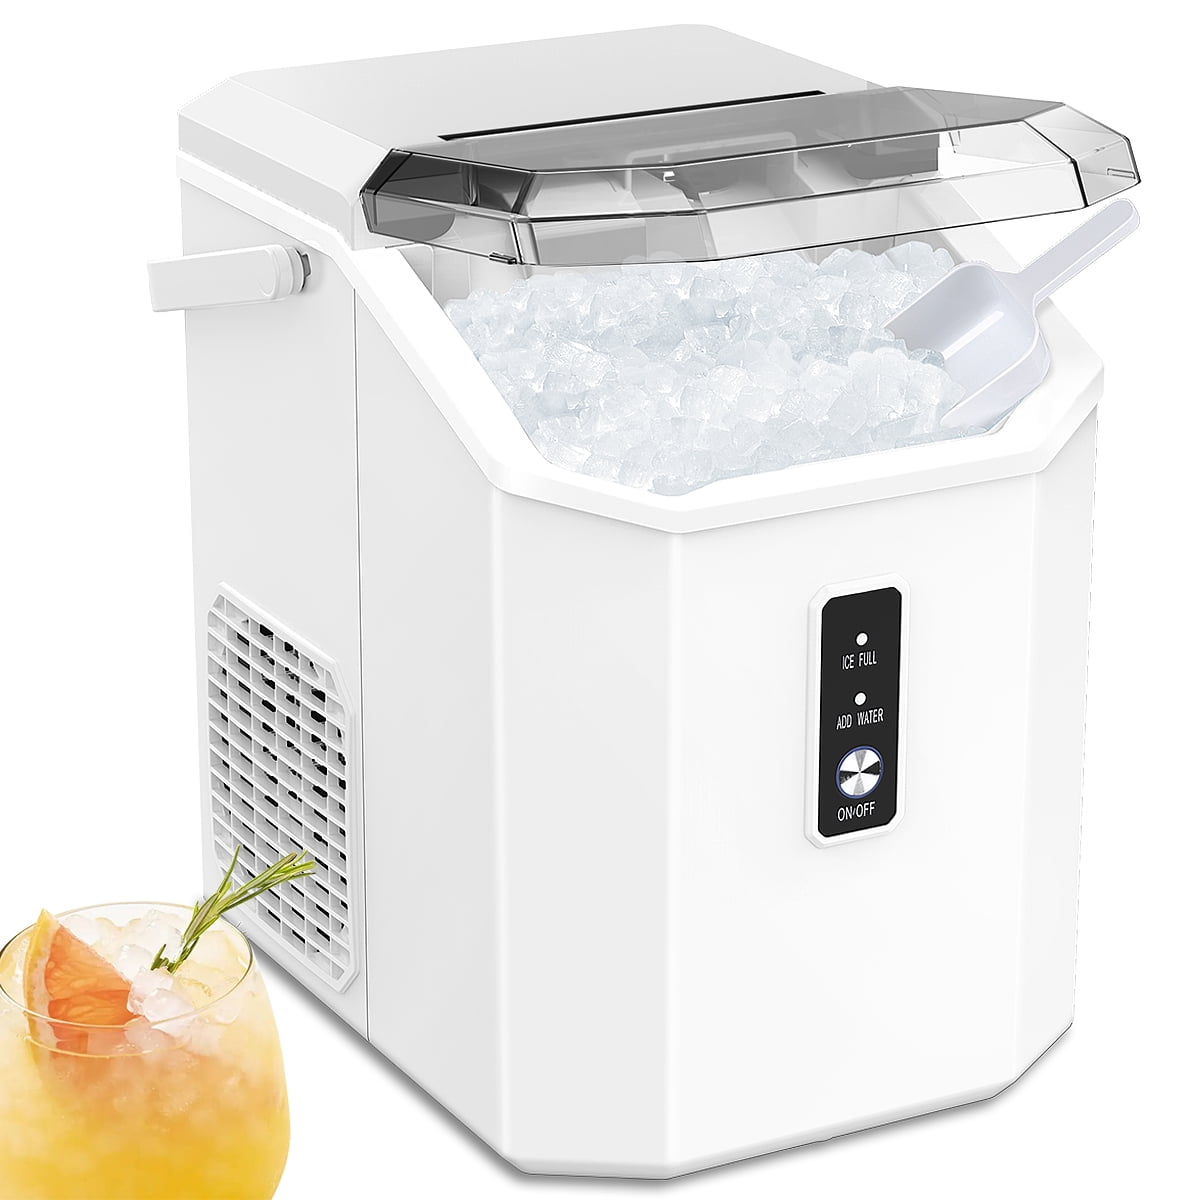 Kndko Nugget Ice Maker with Handle,33lbs/Day, Produce a Basket in 1.5 Hour,  Self-Cleaning, One-Click Design, Compact Ice Maker Nugget with Chewy Ice